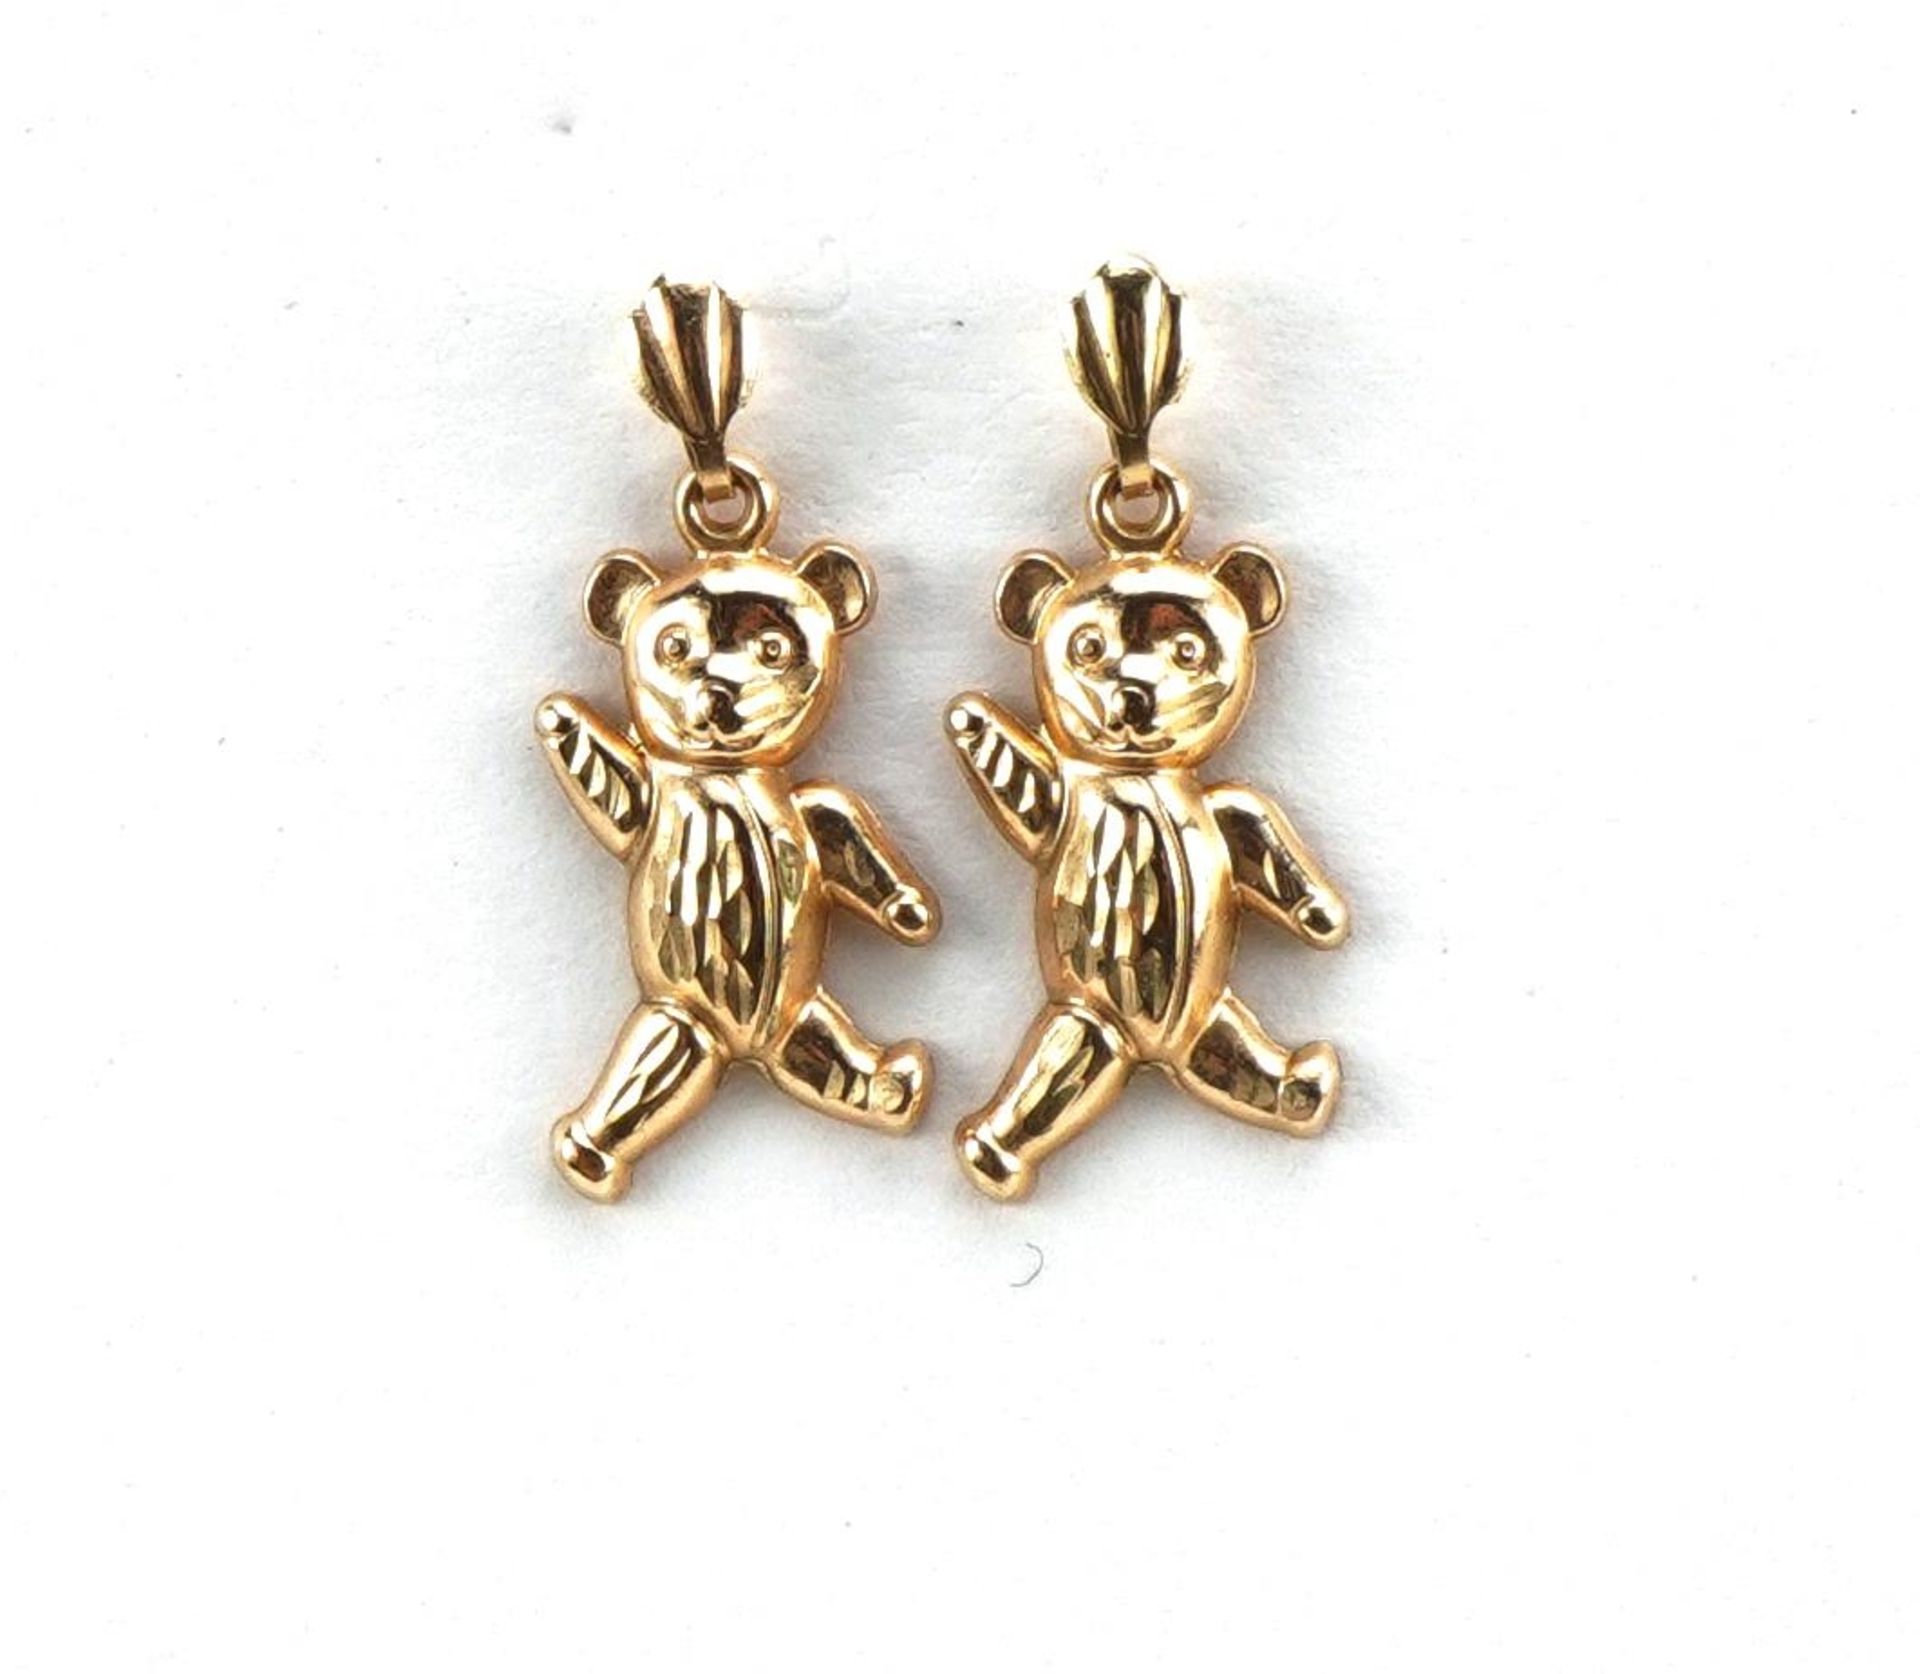 Pair of unmarked gold teddy bear drop earrings, the backs marked 9ct, 2.1cm high, 0.4g : For further